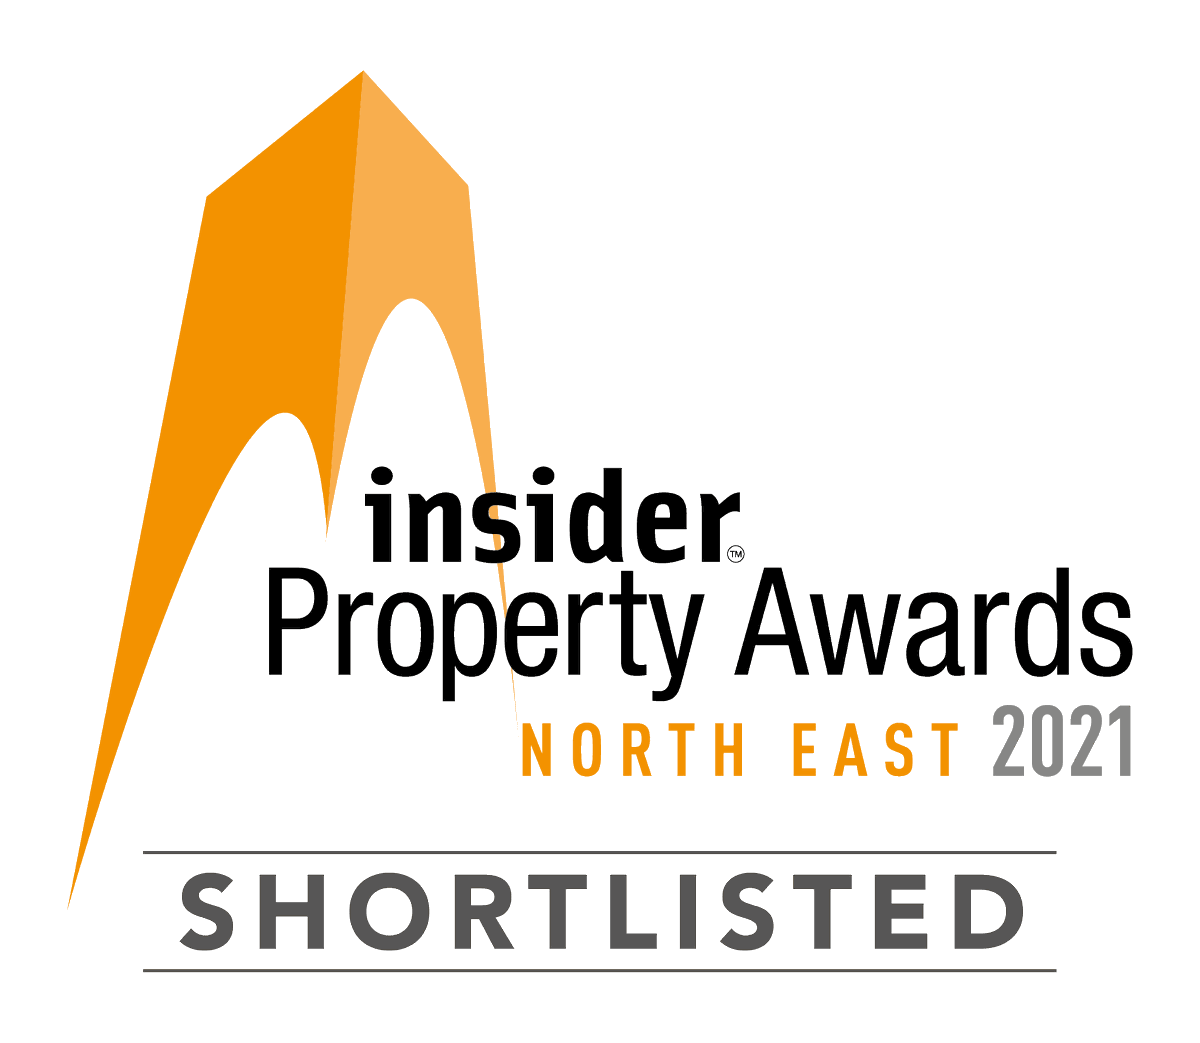 Great to see the fit out of @NGPLtd shortlisted in the 
@insiderneast Property Awards, project collaboration with @tricon333 @AYNorthViews #NEProp insidermedia.com/news/north-eas…